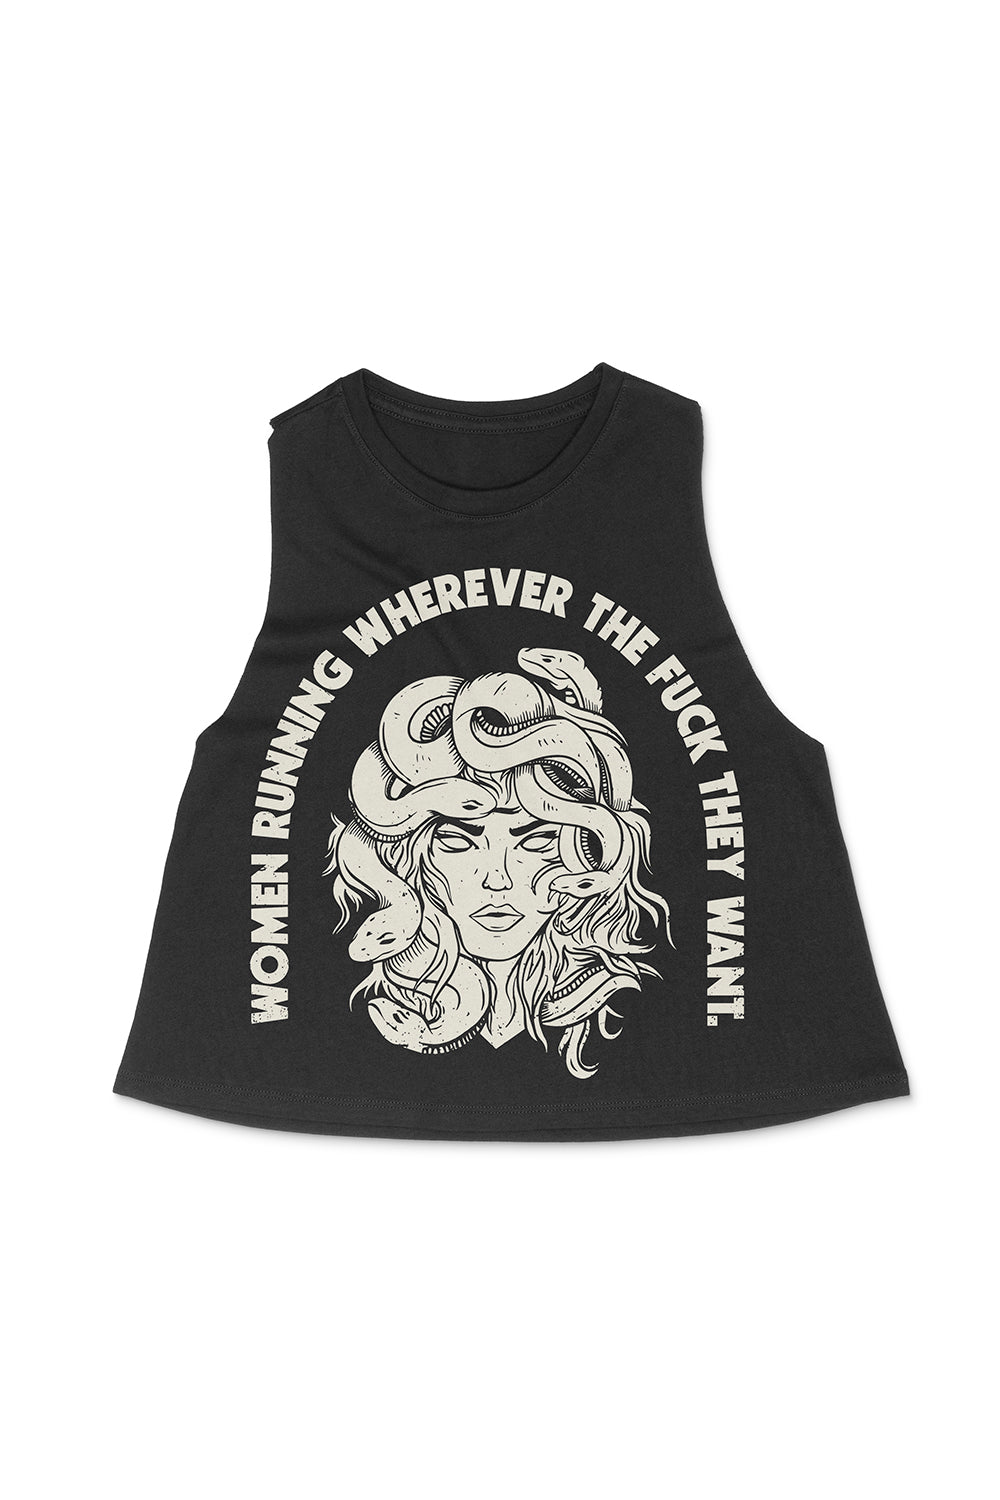 Women Running Wherever They Want Racerback Crop Top